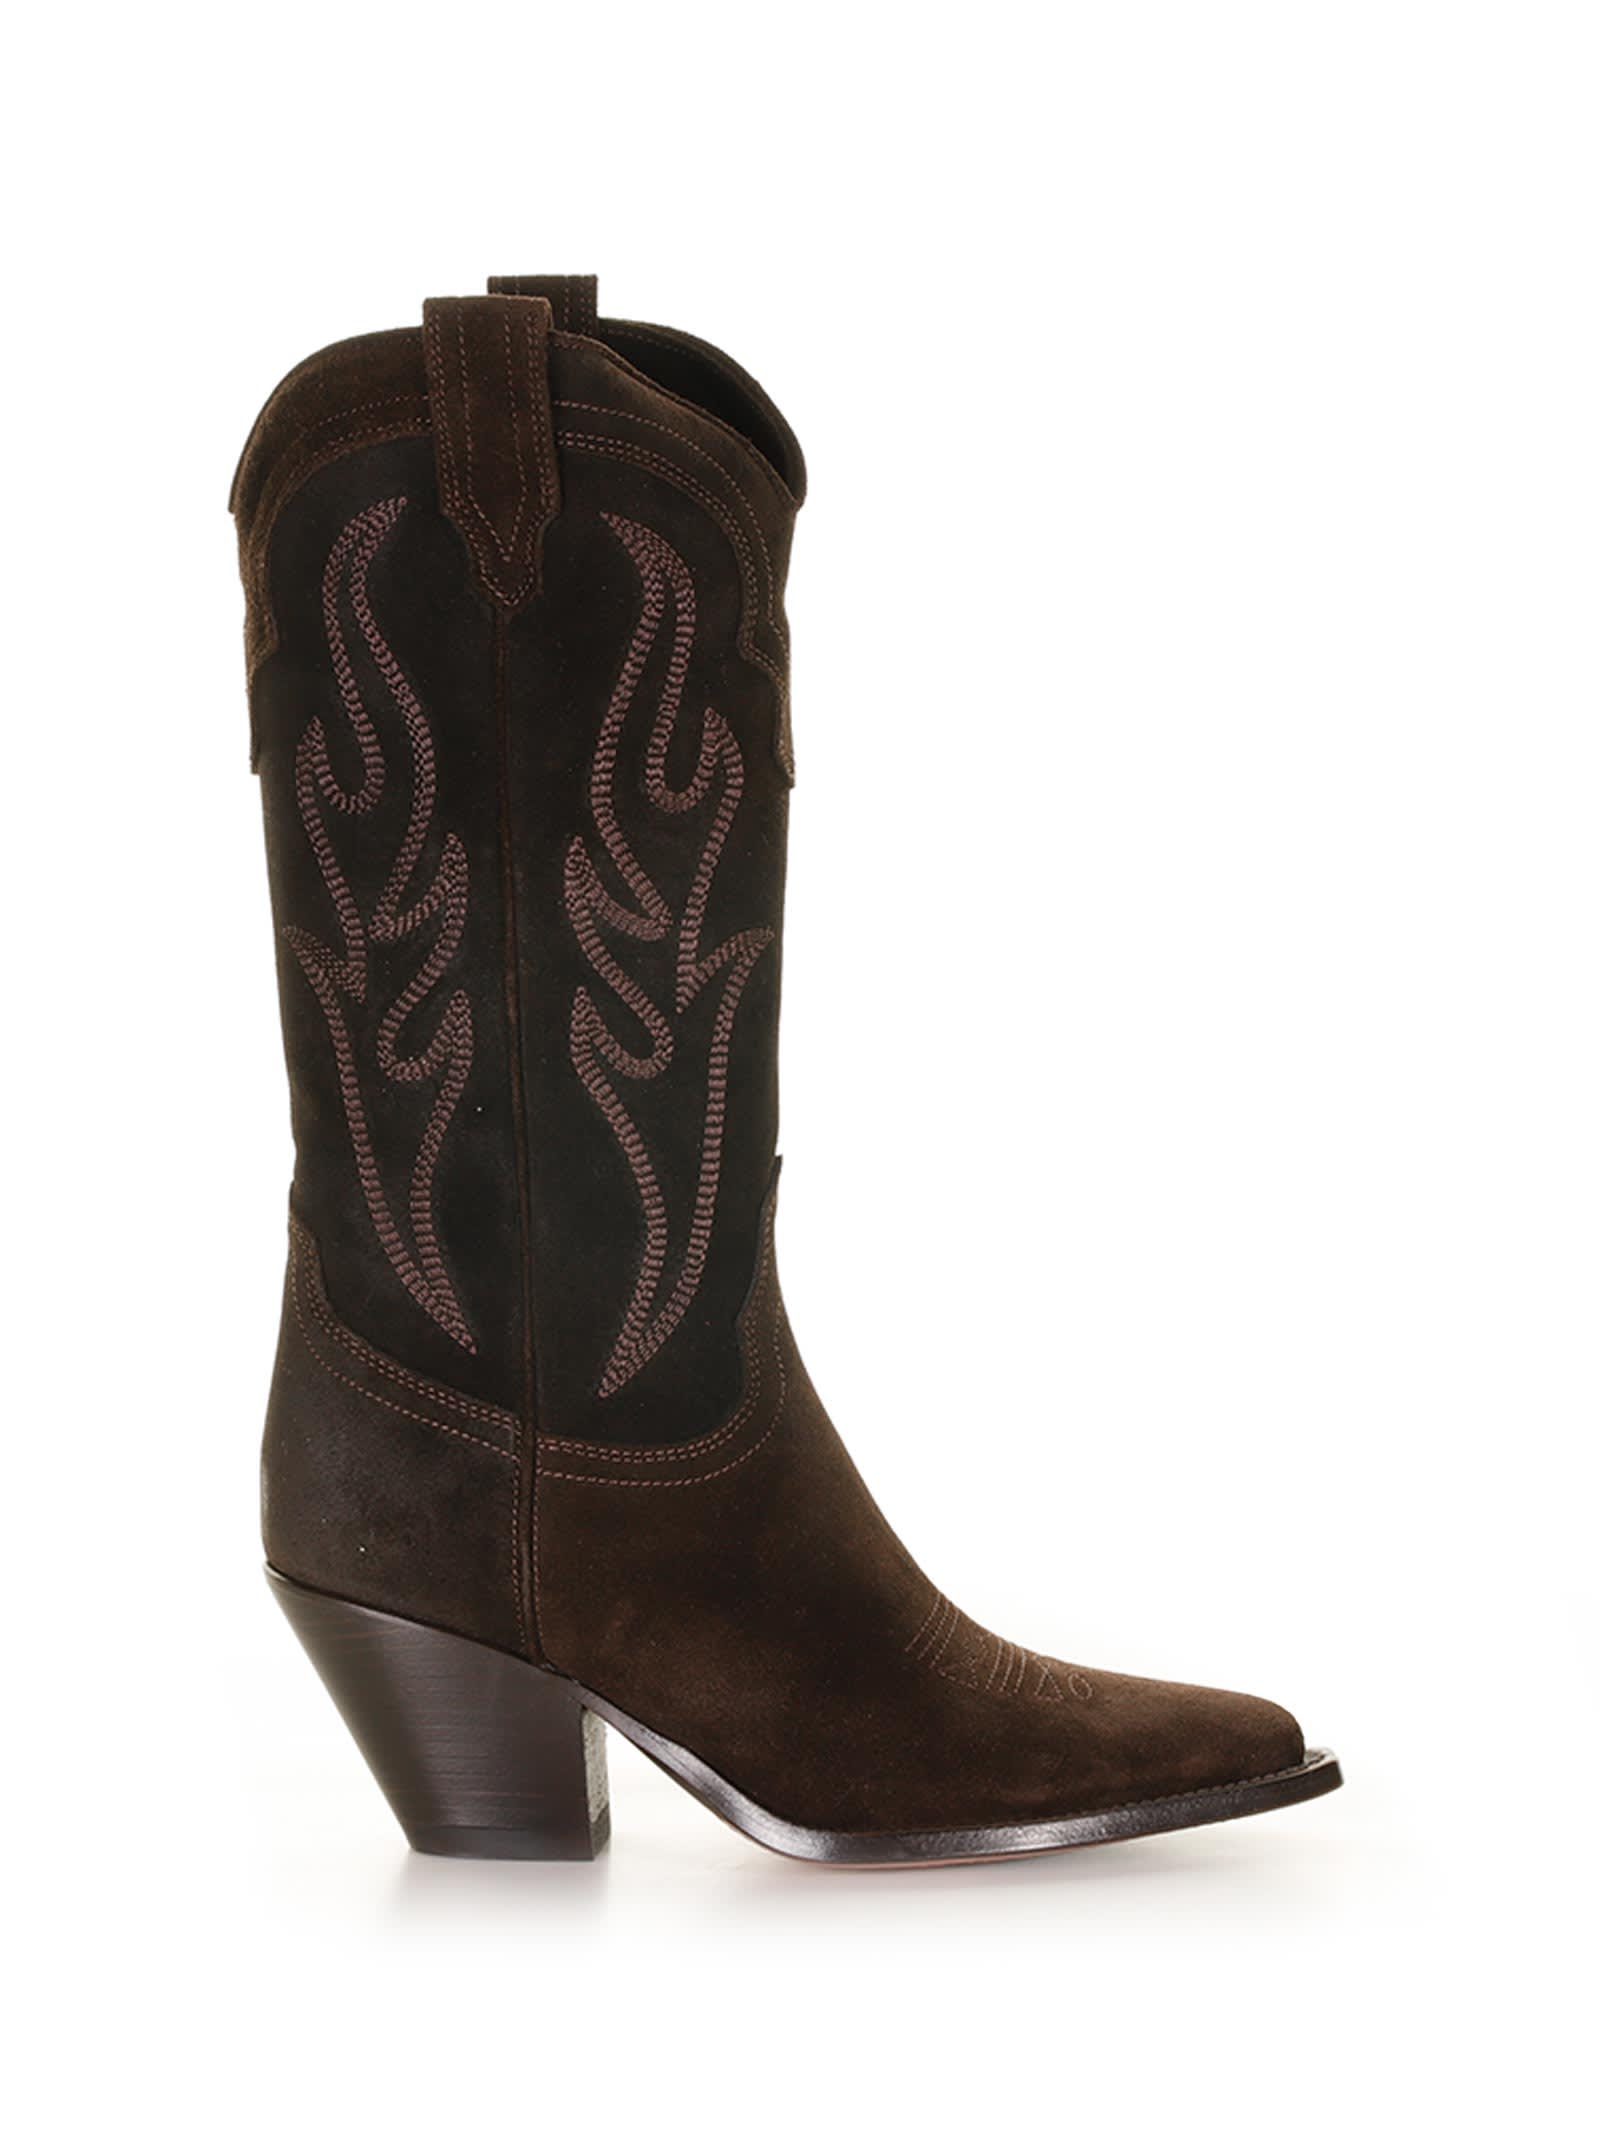 Santa Fe Cowboy Style Texan Boot In Embroidered Suede